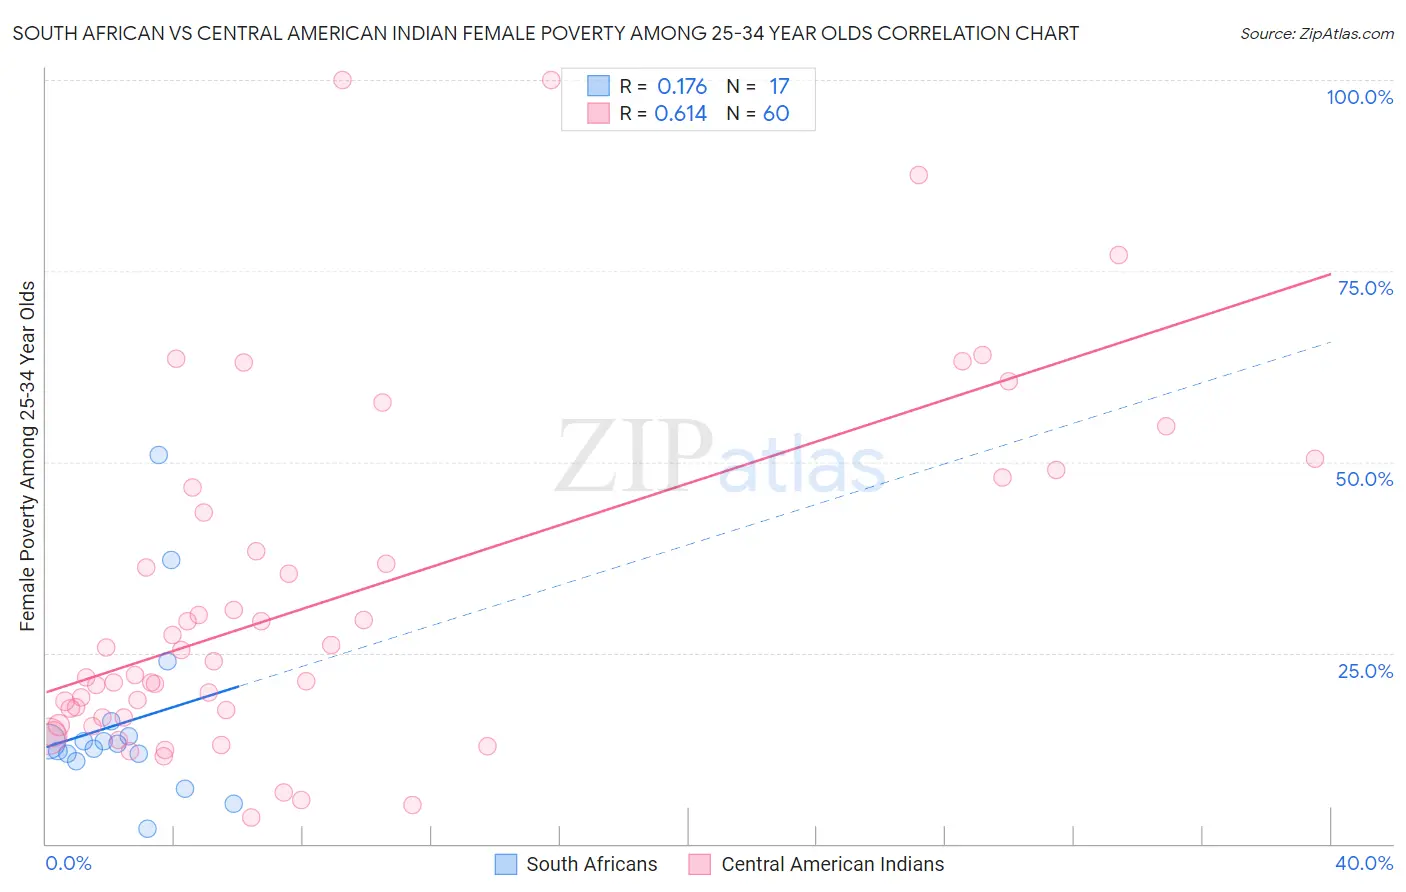 South African vs Central American Indian Female Poverty Among 25-34 Year Olds